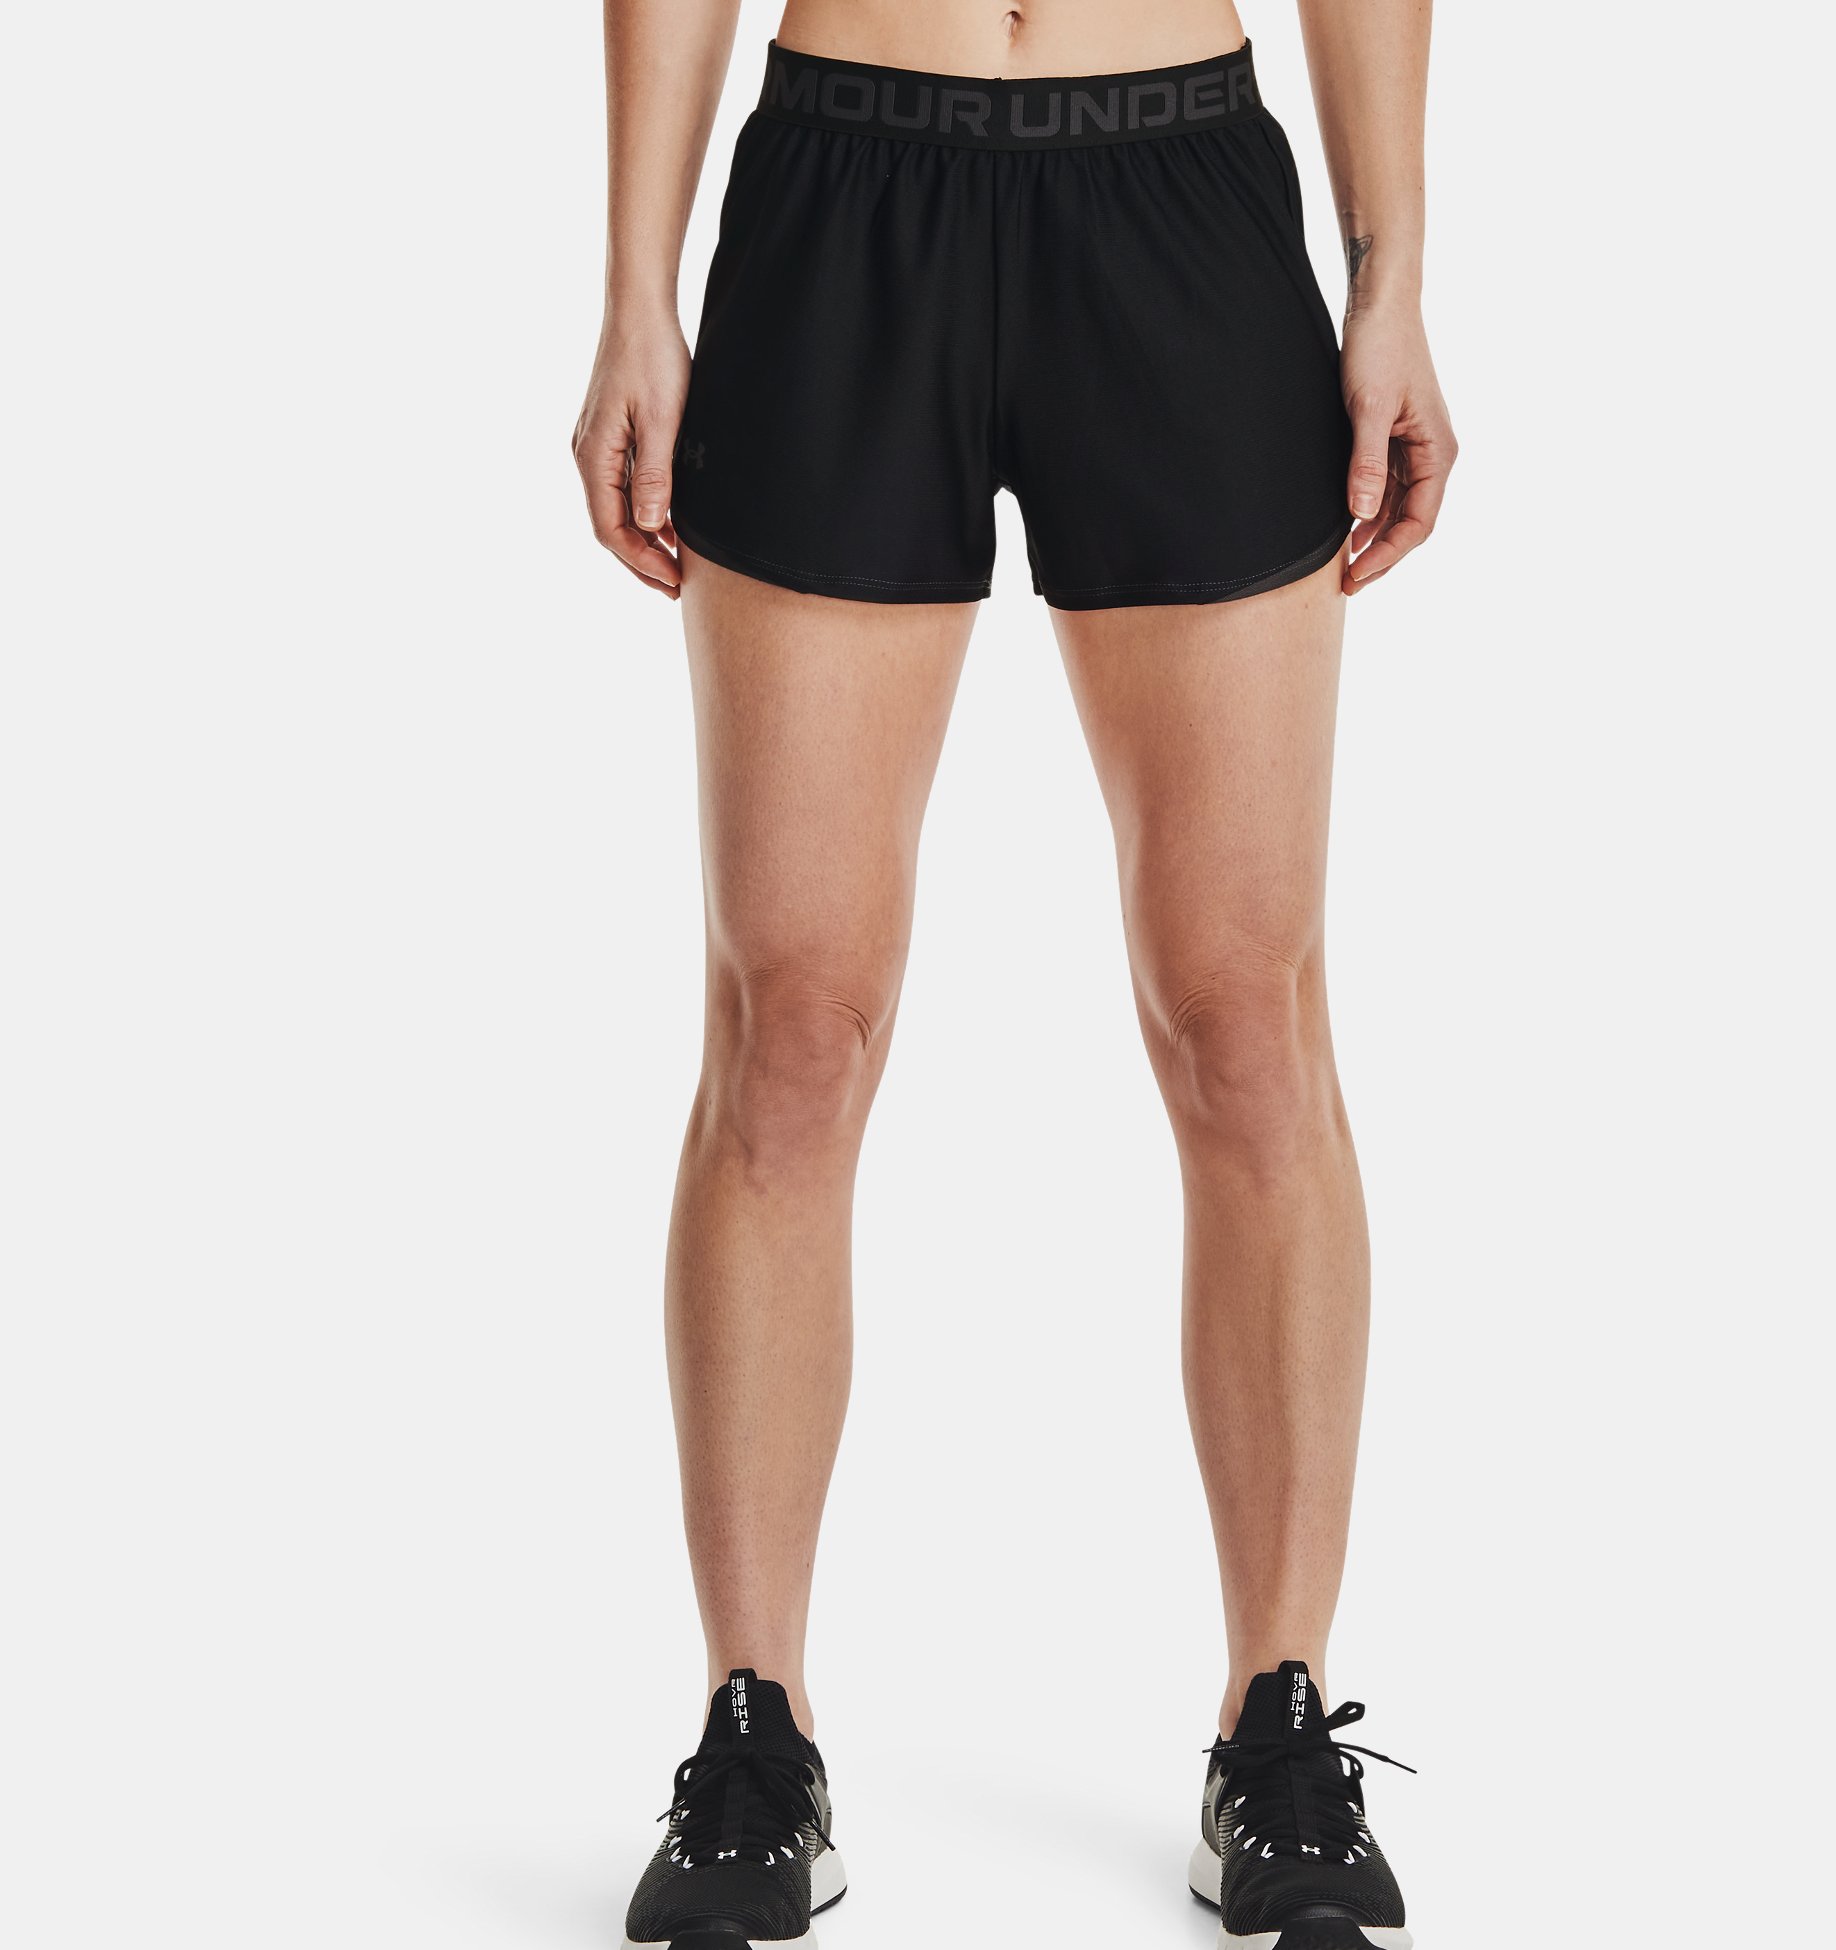 Under Armour Women's UA Play Up 2.0 Shorts (Black) $6.60 + Free Shipping